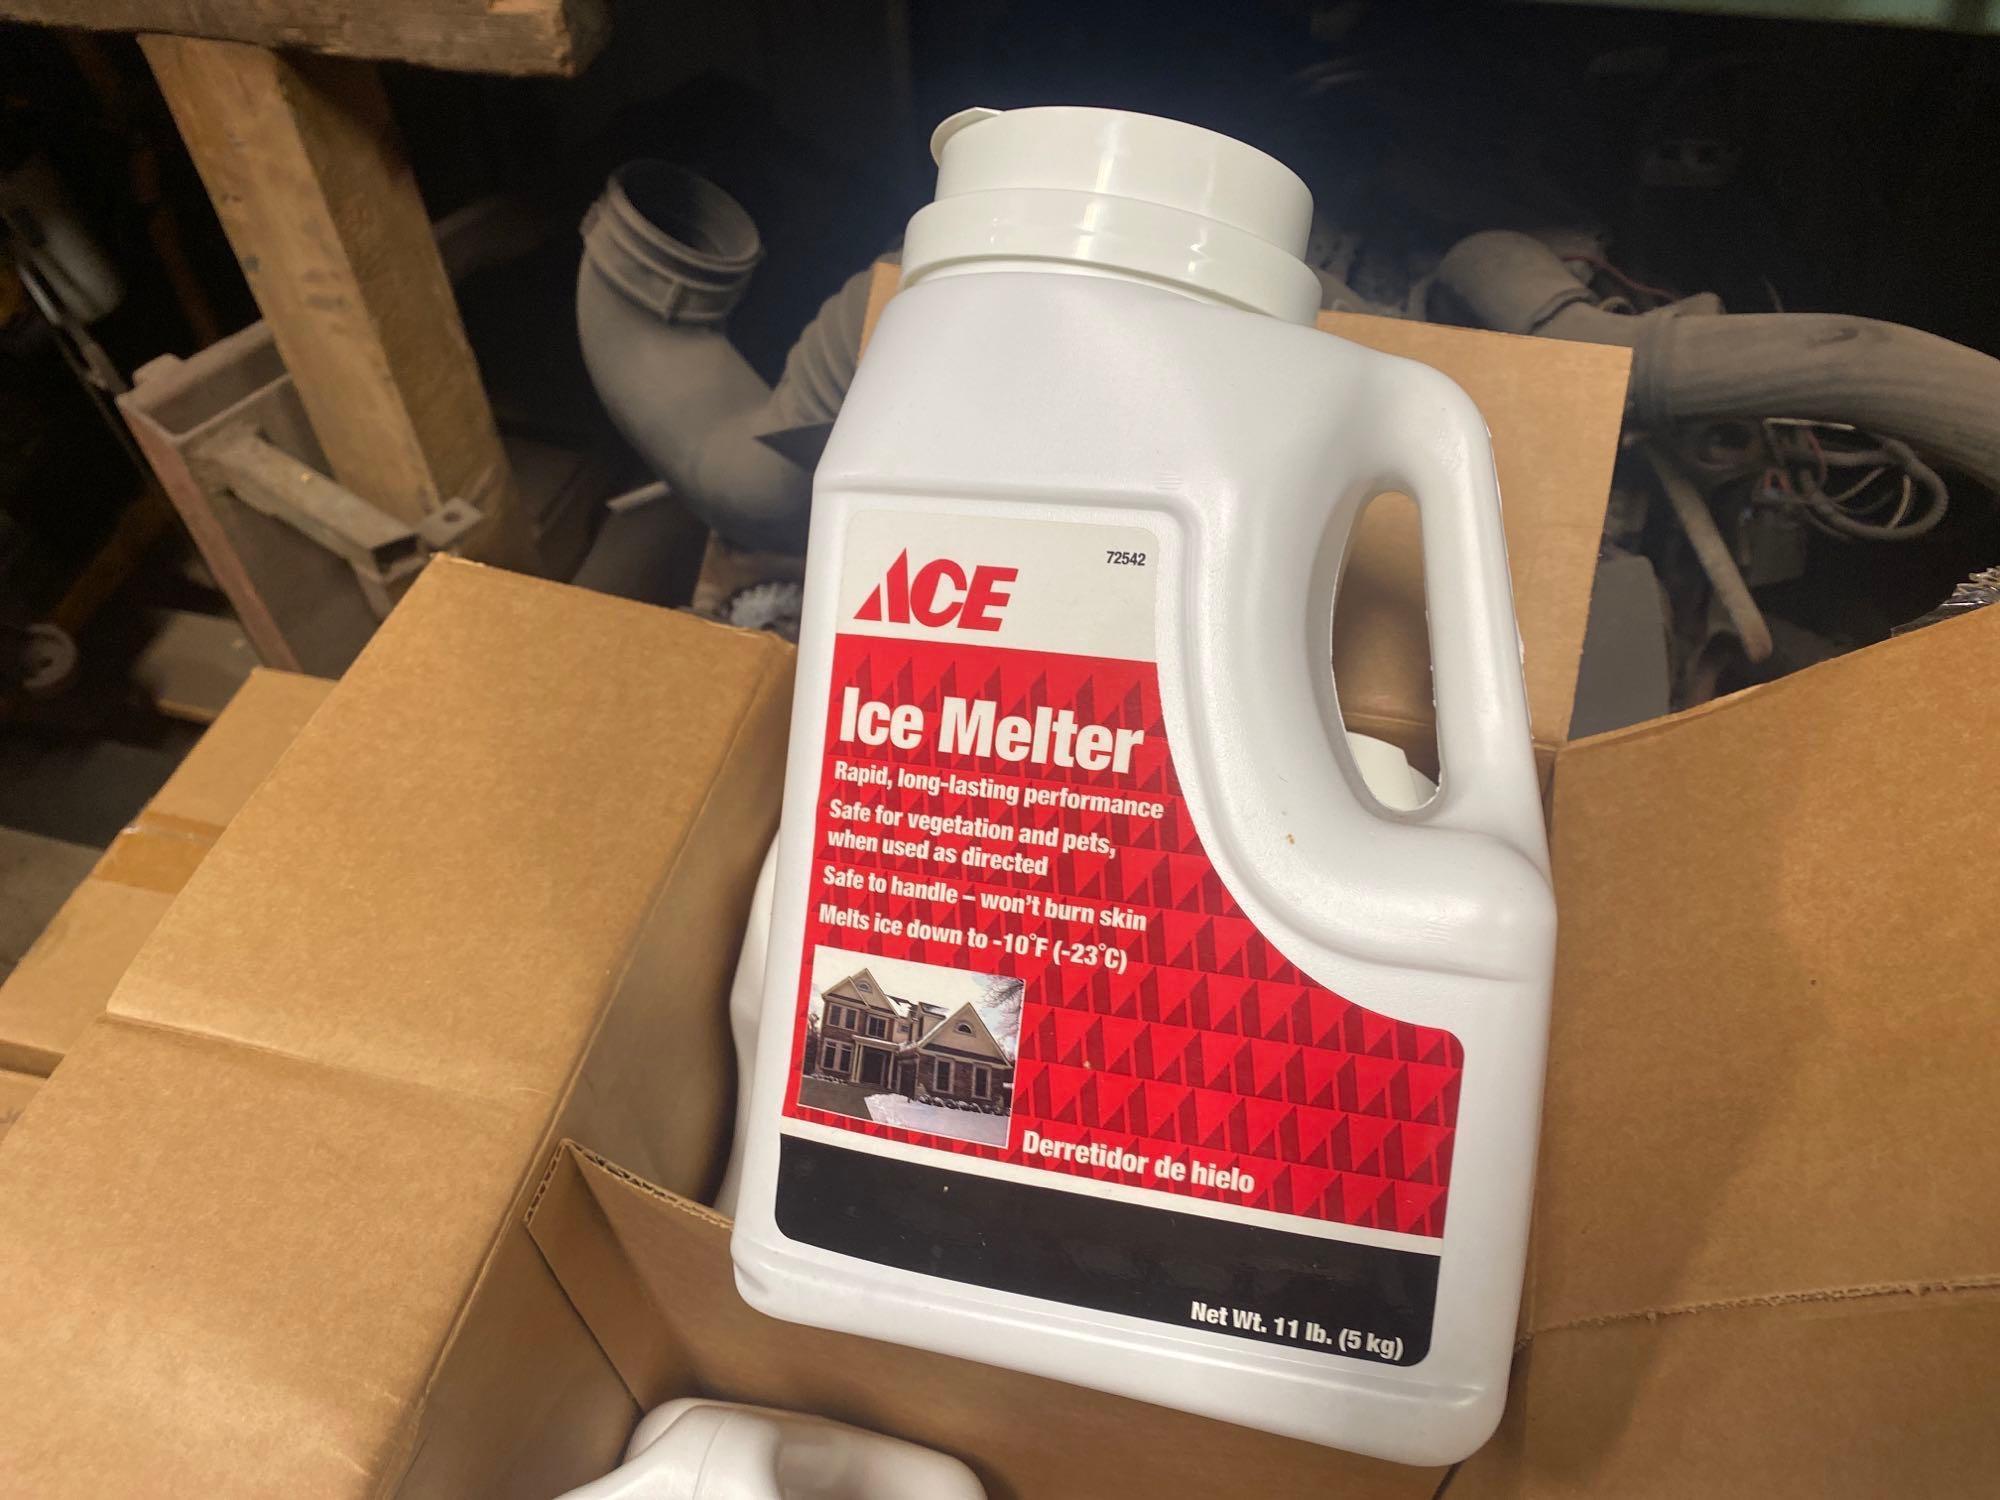 ACE Ice Melter, 11 lb. shaker jugs. Lot of 20.